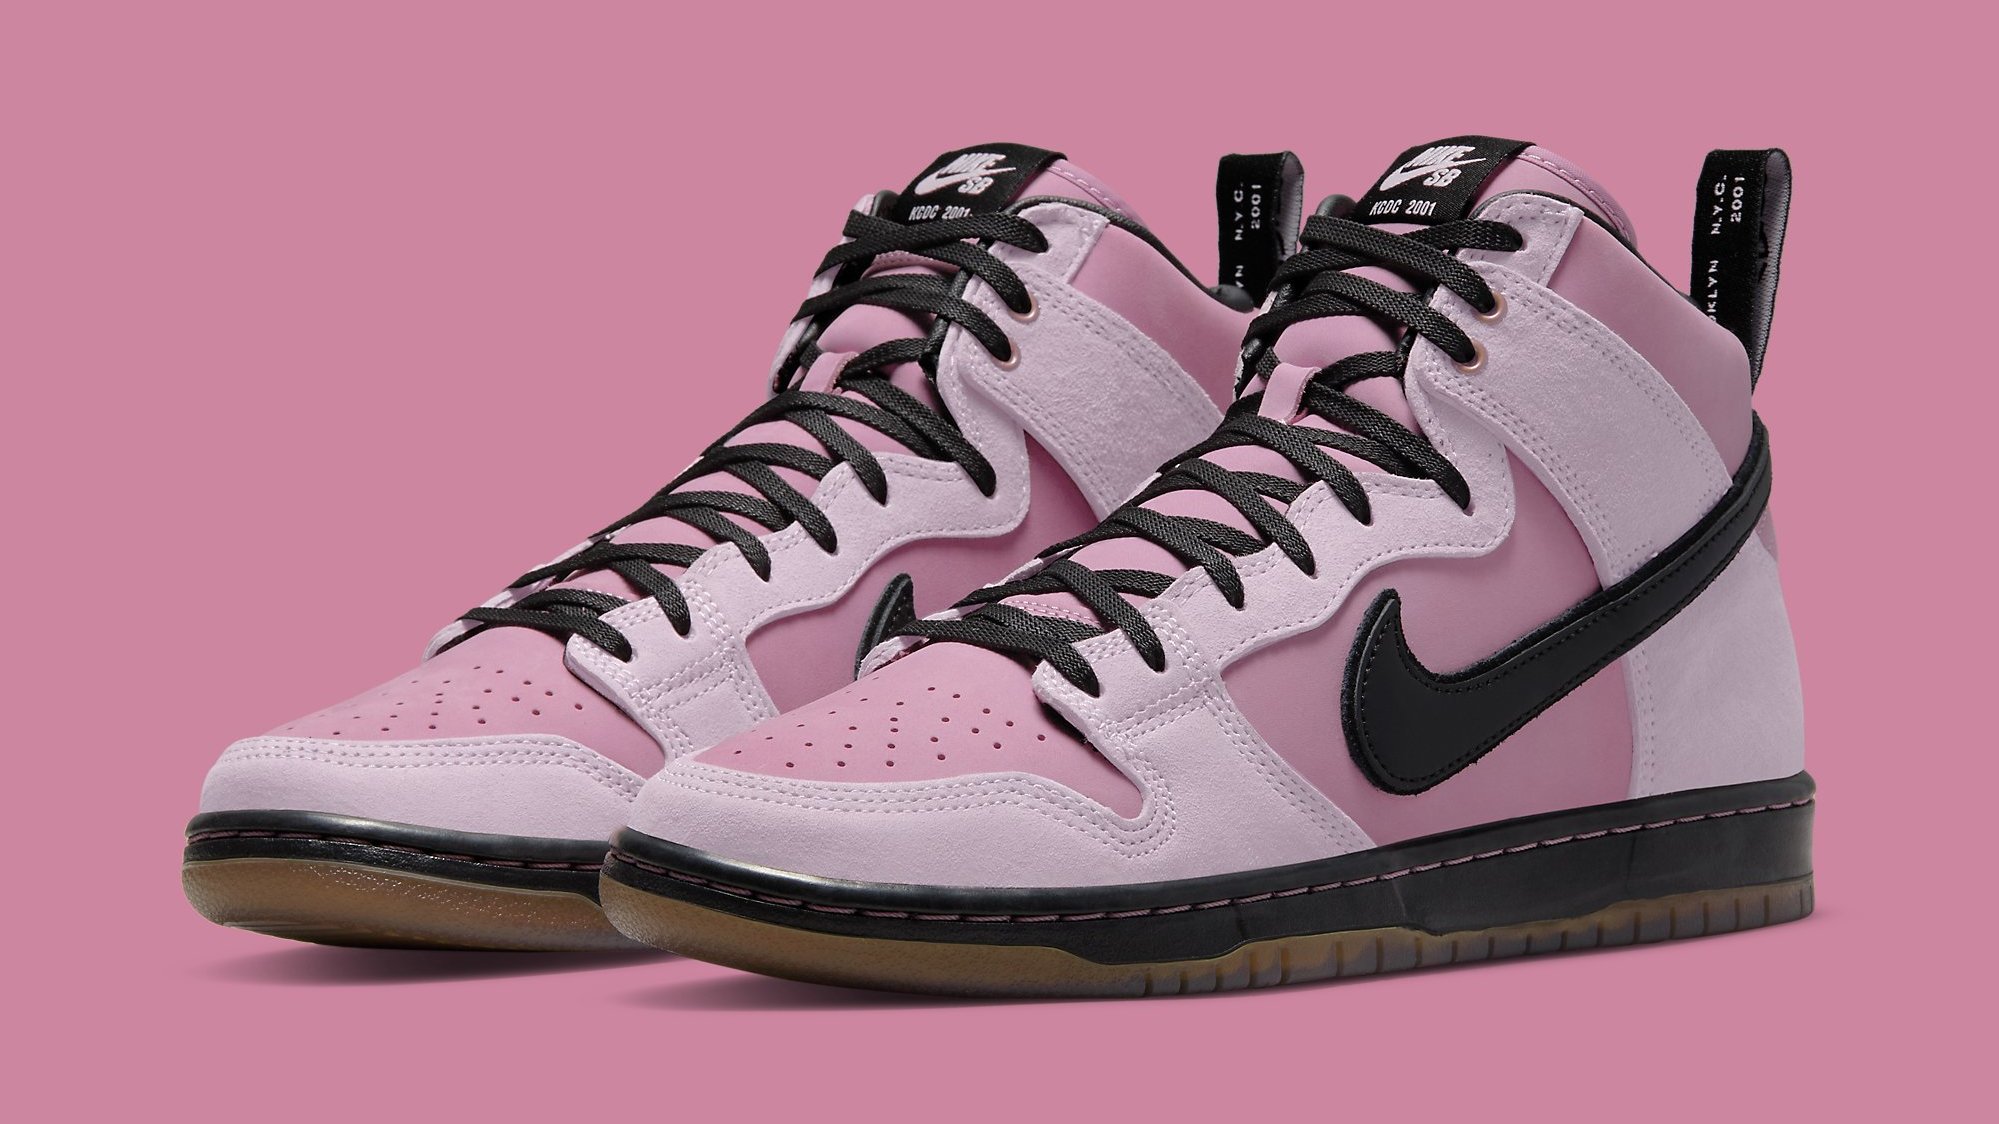 KCDC's Nike SB Dunk Collab Is Releasing Next Week | Complex